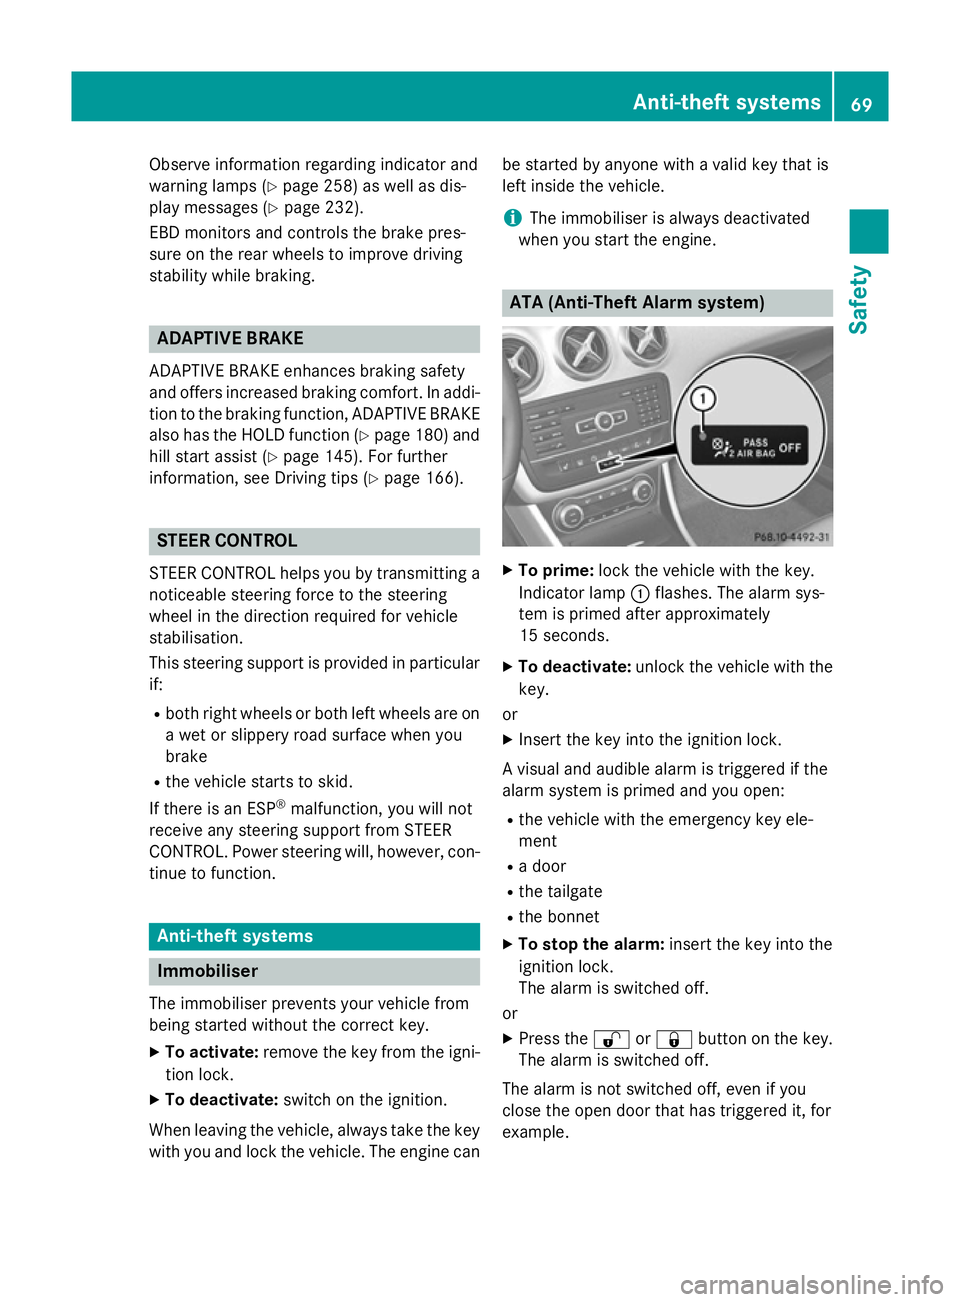 MERCEDES-BENZ A-CLASS HATCHBACK 2012  Owners Manual Observe information regarding indicator and
warning lamps (Y page 258) as well as dis-
play messages (Y page 232).
EBD monitors and controls the brake pres-
sure on the rear wheels to improve driving
